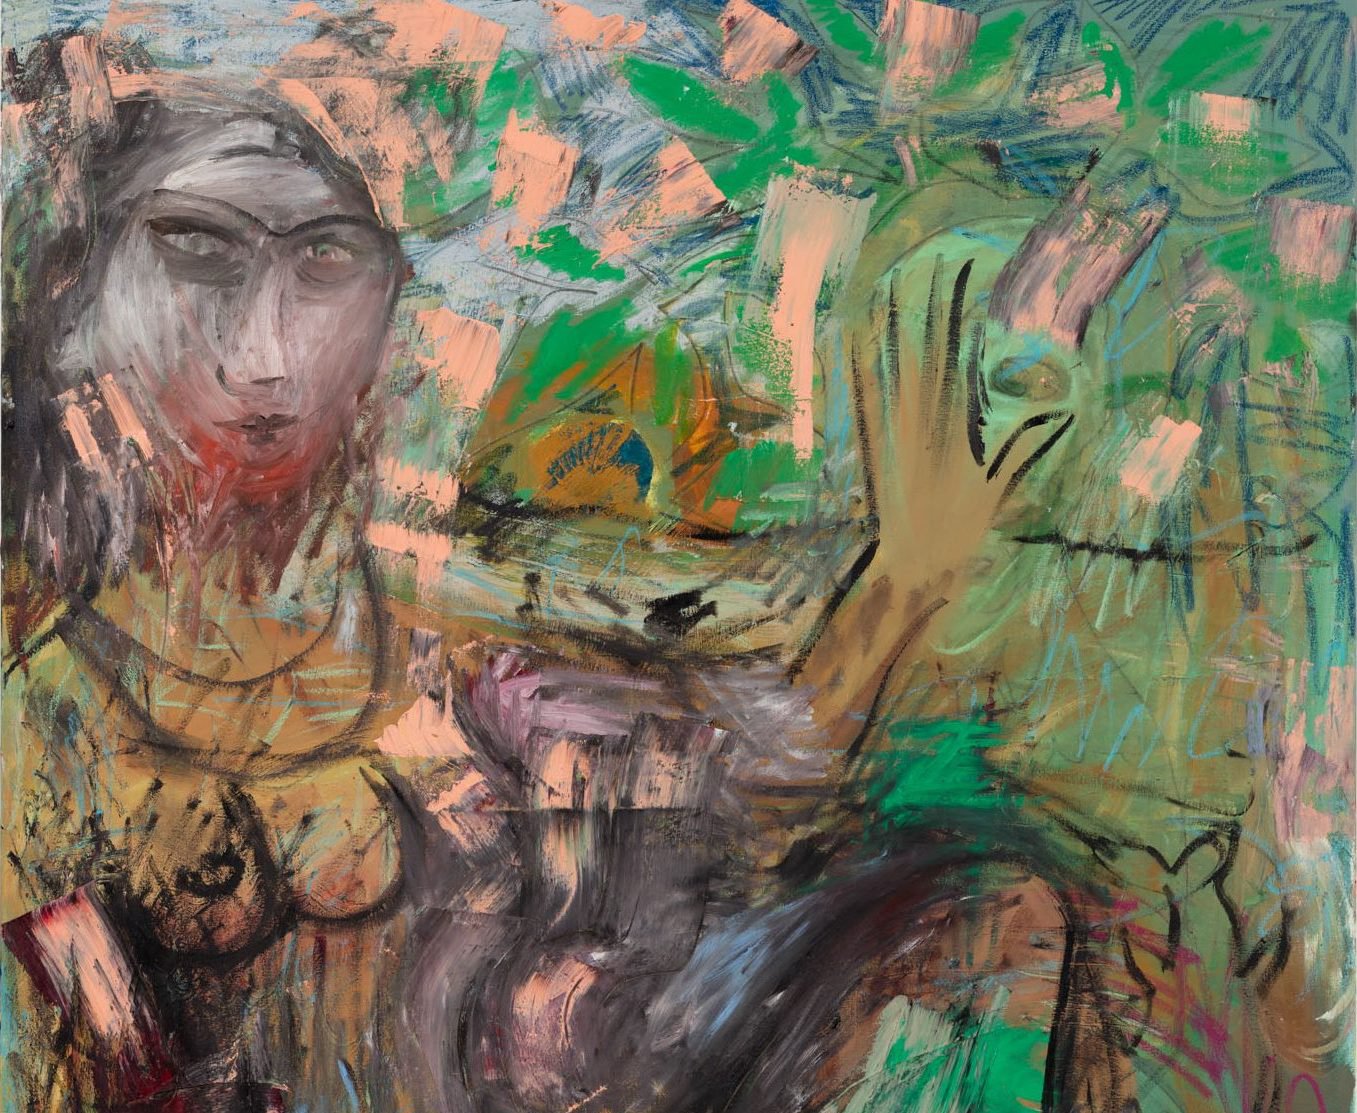 Lucy Stein, Self Portrait as High Priestess of the Green Flash, oil, acrylic and oil pastel on canvas, 160 x 120 cm (63 x 47 1/4 in), 2016